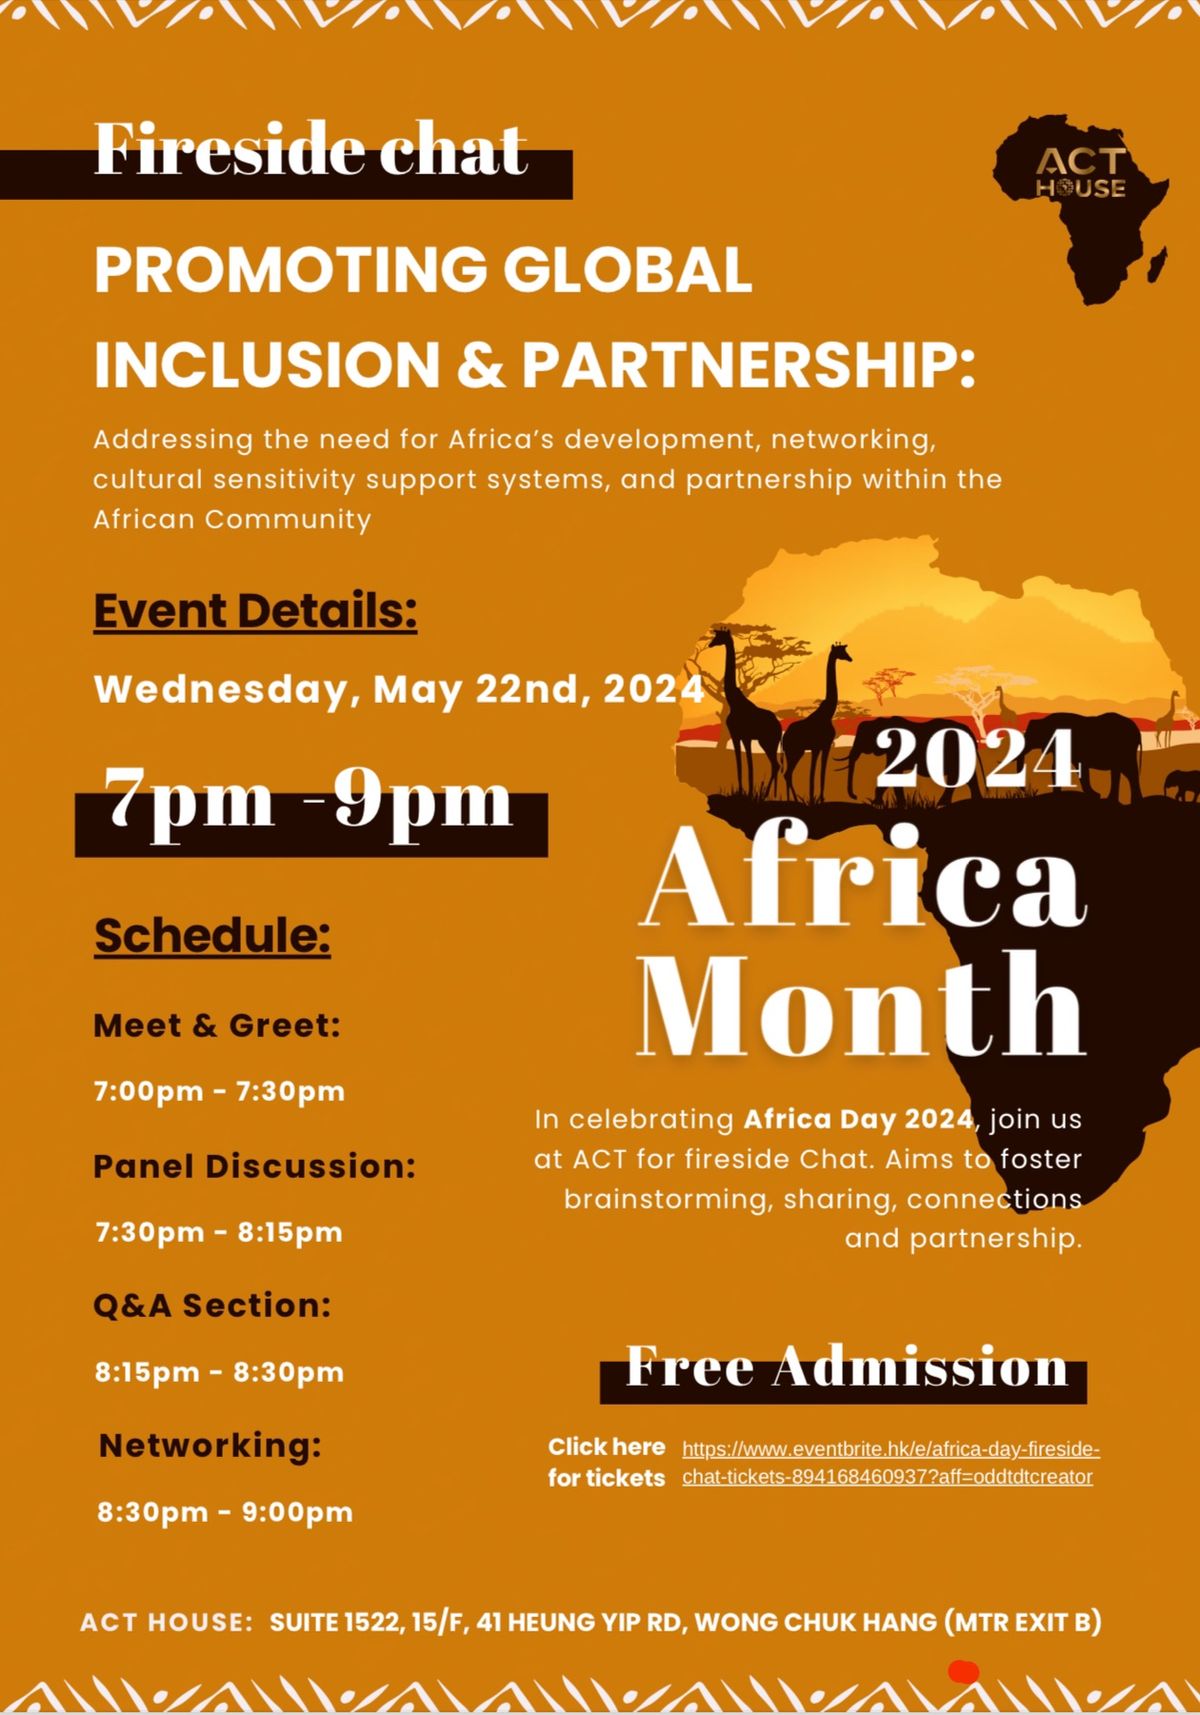 Africa Month - Fireside Chat Promoting Global Inclusion & Partnership